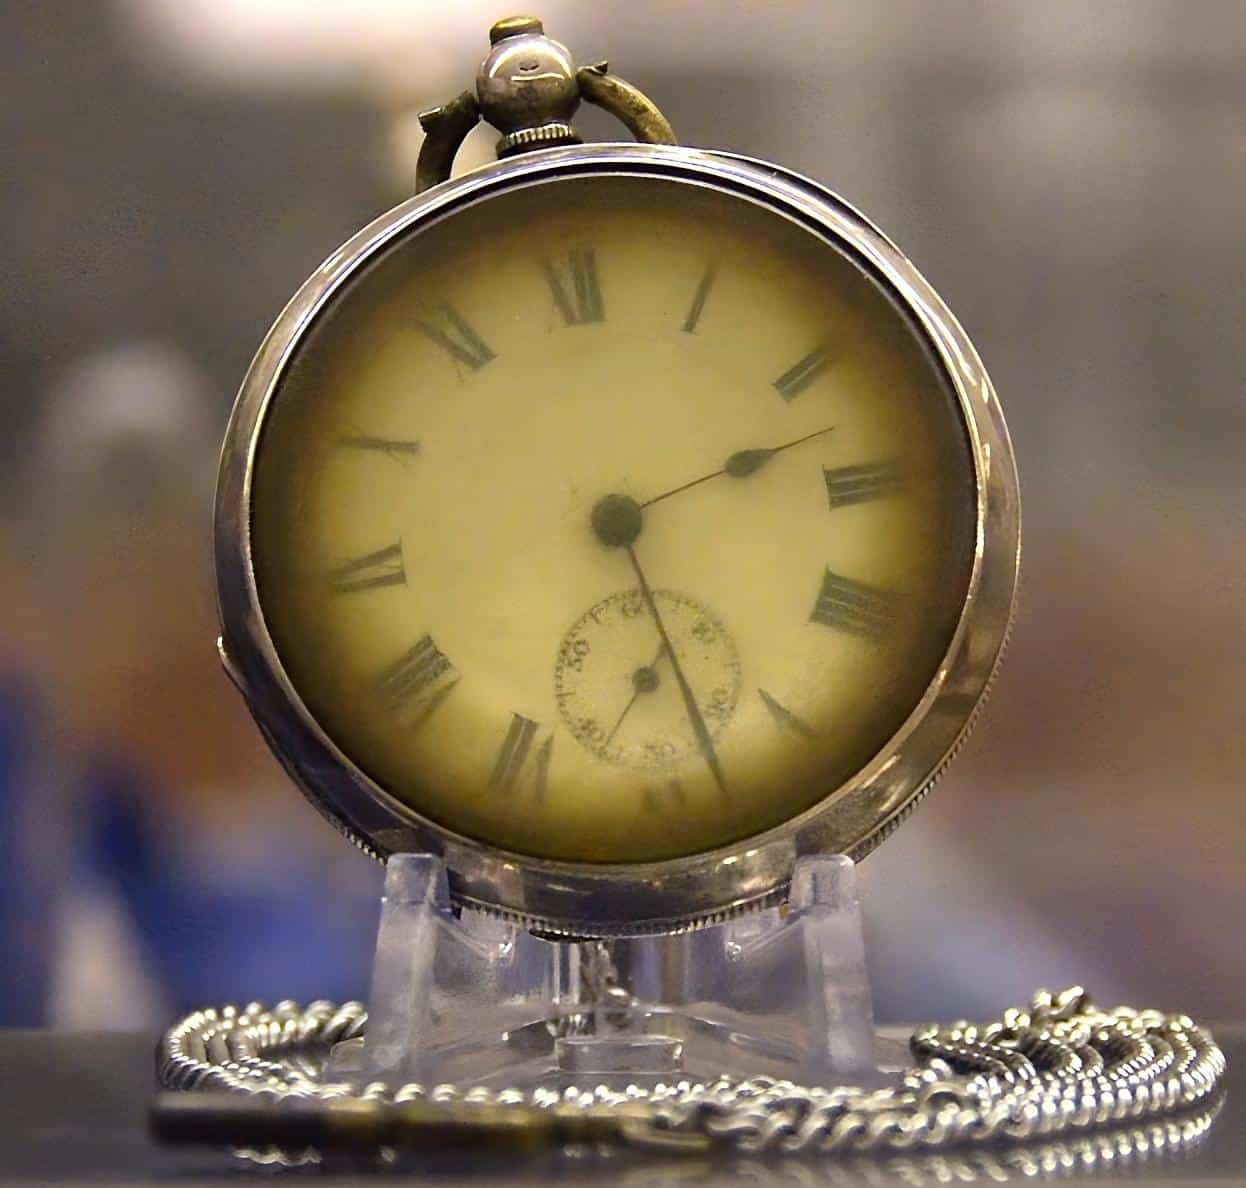 <p>There’s something very somber about this pocket watch recovered from the Titanic wreckage. The timestamp of 02:28 AM is a likely indicator of the time the owner jumped or fell into the water. It’s possible the watch ran for a few more minutes but it’s unknown if the owner lived or perished.</p><p><span>Would you please let us know what you think about our content? <p>Agree? Tell us by clicking the “Thumbs Up” button above.</p> Disagree? Leave a comment telling us what you’d change.</span></p>     <h3>Up Next:</h3>     <ul>         <li><a href="https://history-computer.com?p=540709&utm_campaign=msn&utm_source=msn_slideshow&utm_content=553829&utm_medium=more_from">10 of the Creepiest Photos Ever Taken</a></li>         <li><a href="https://history-computer.com?p=468&utm_campaign=msn&utm_source=msn_slideshow&utm_content=553829&utm_medium=more_from">Alan Turing — Complete Biography, History and Inventions</a></li>         <li><a href="https://history-computer.com?p=349935&utm_campaign=msn&utm_source=msn_slideshow&utm_content=553829&utm_medium=more_from">The 8 Best GoPro Accessories</a></li>     </ul>